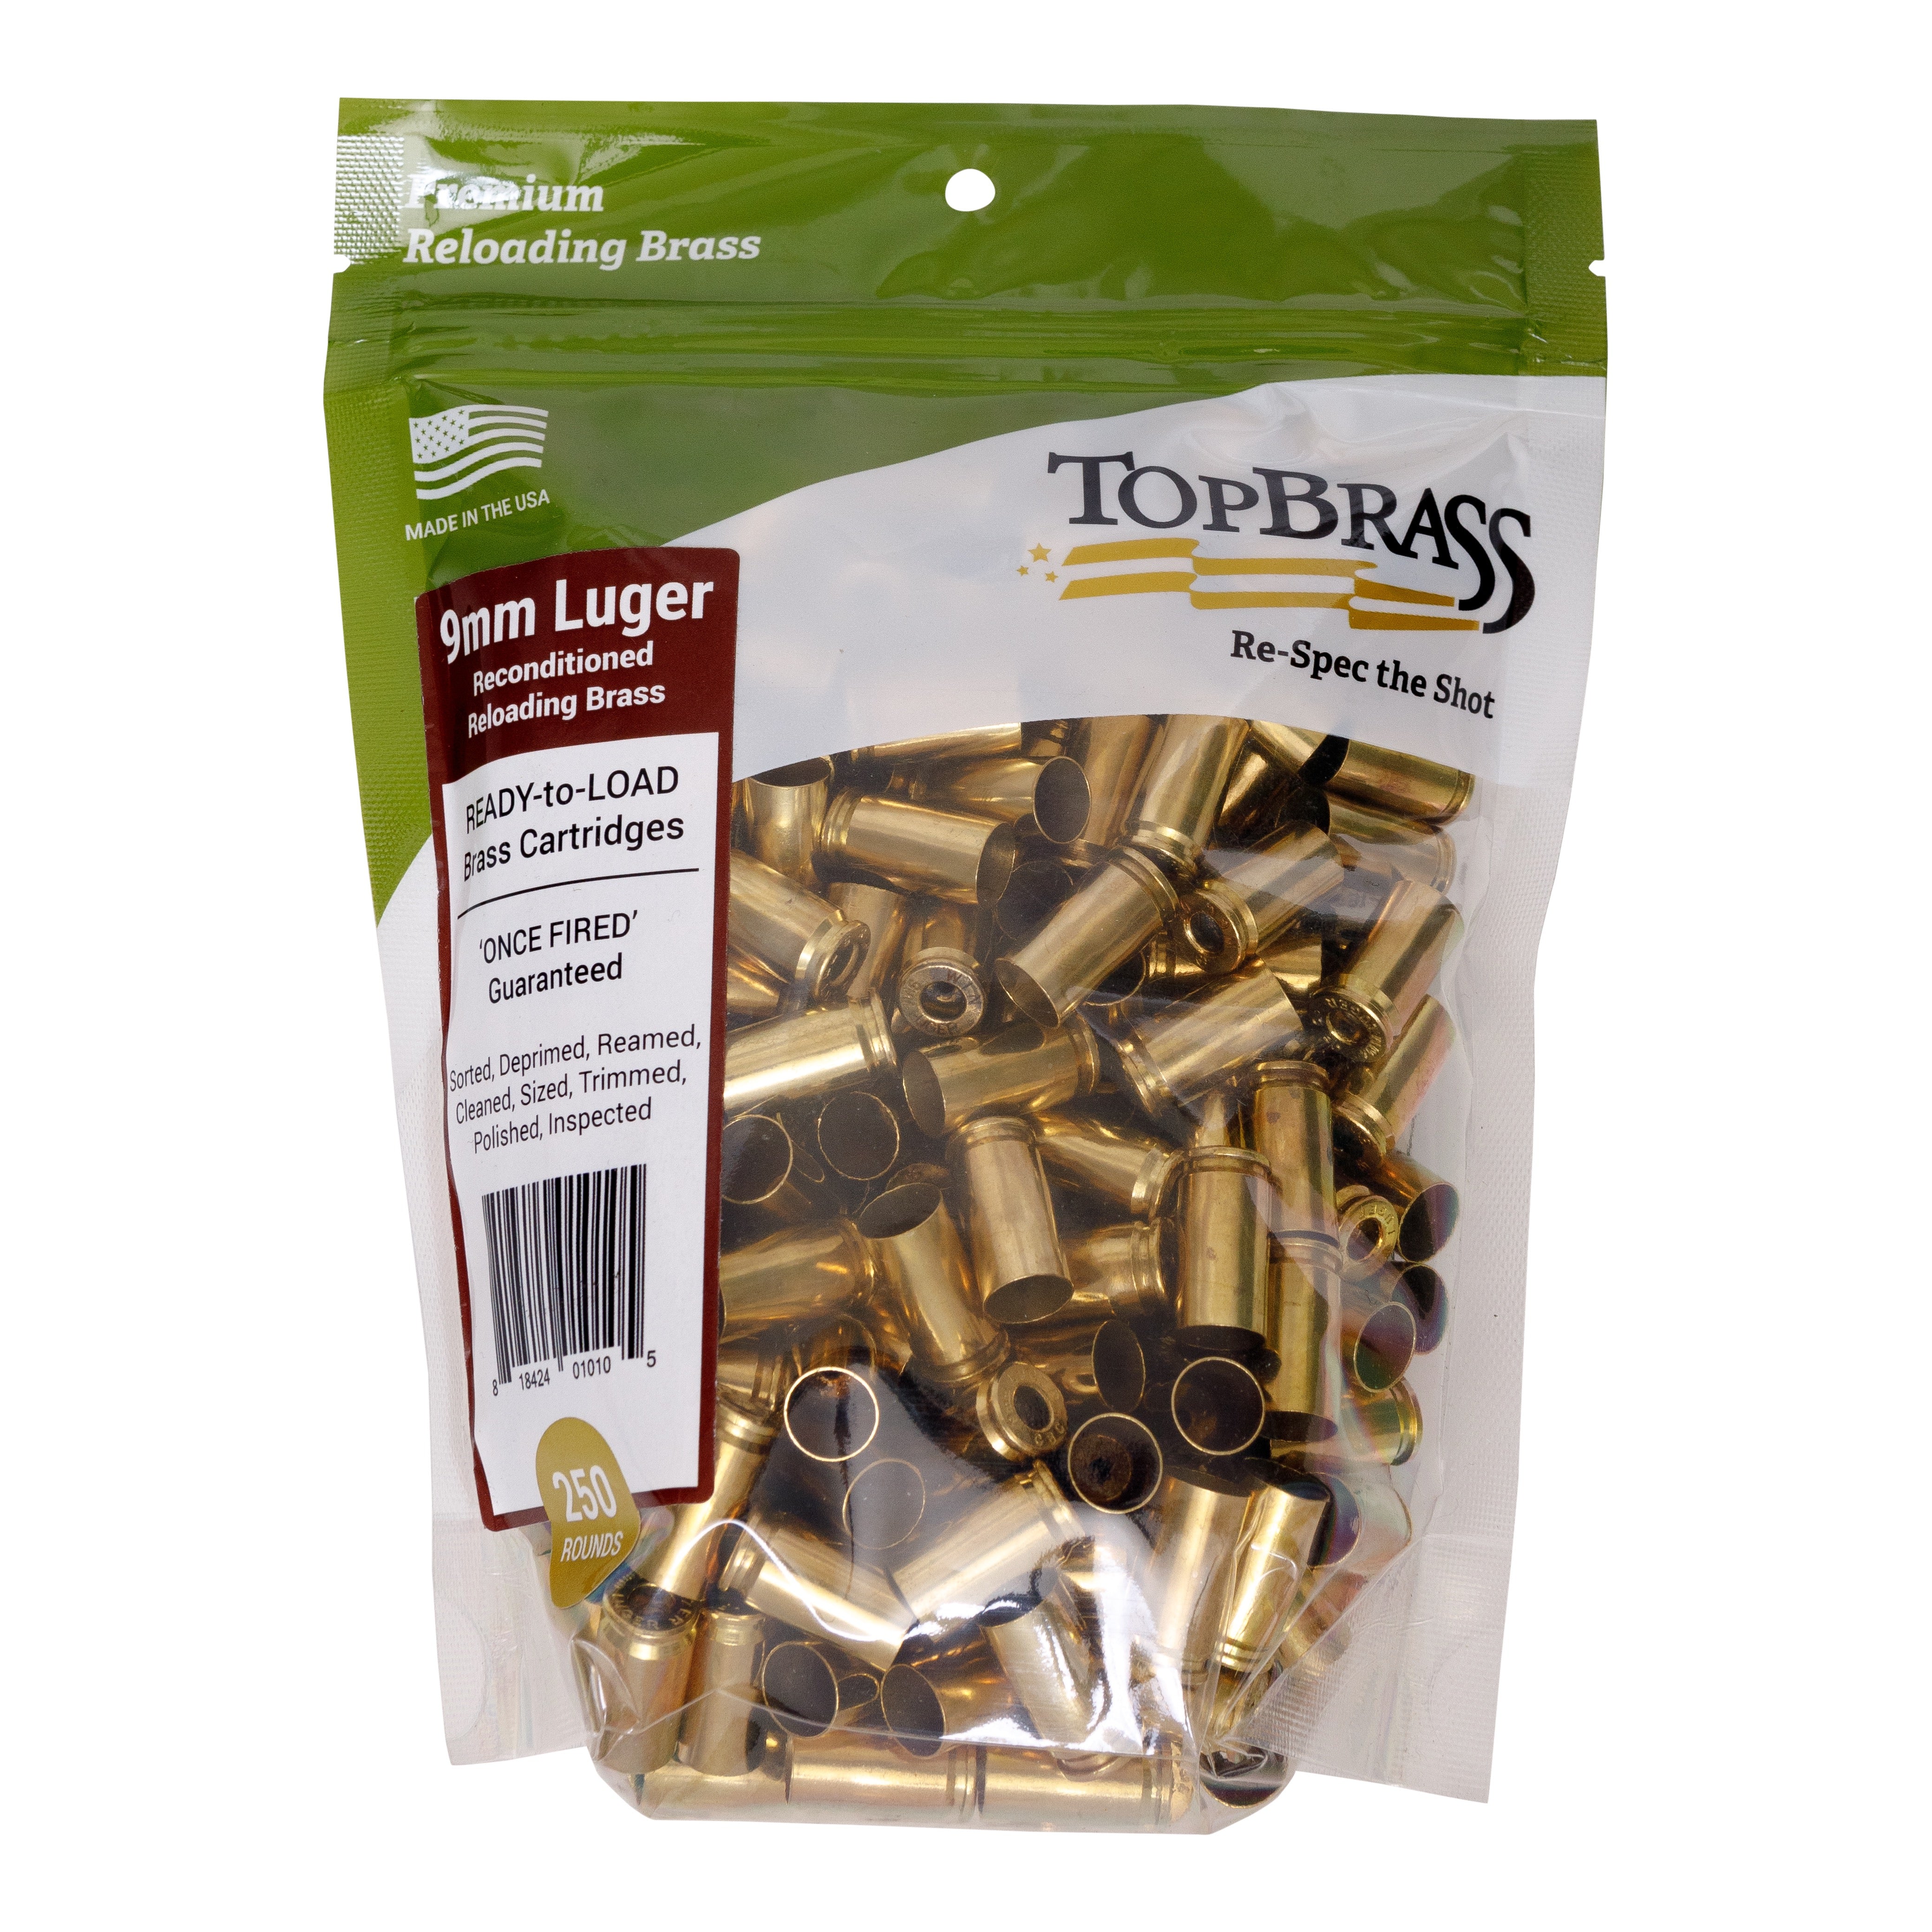 9mm Luger Reconditioned  Brass